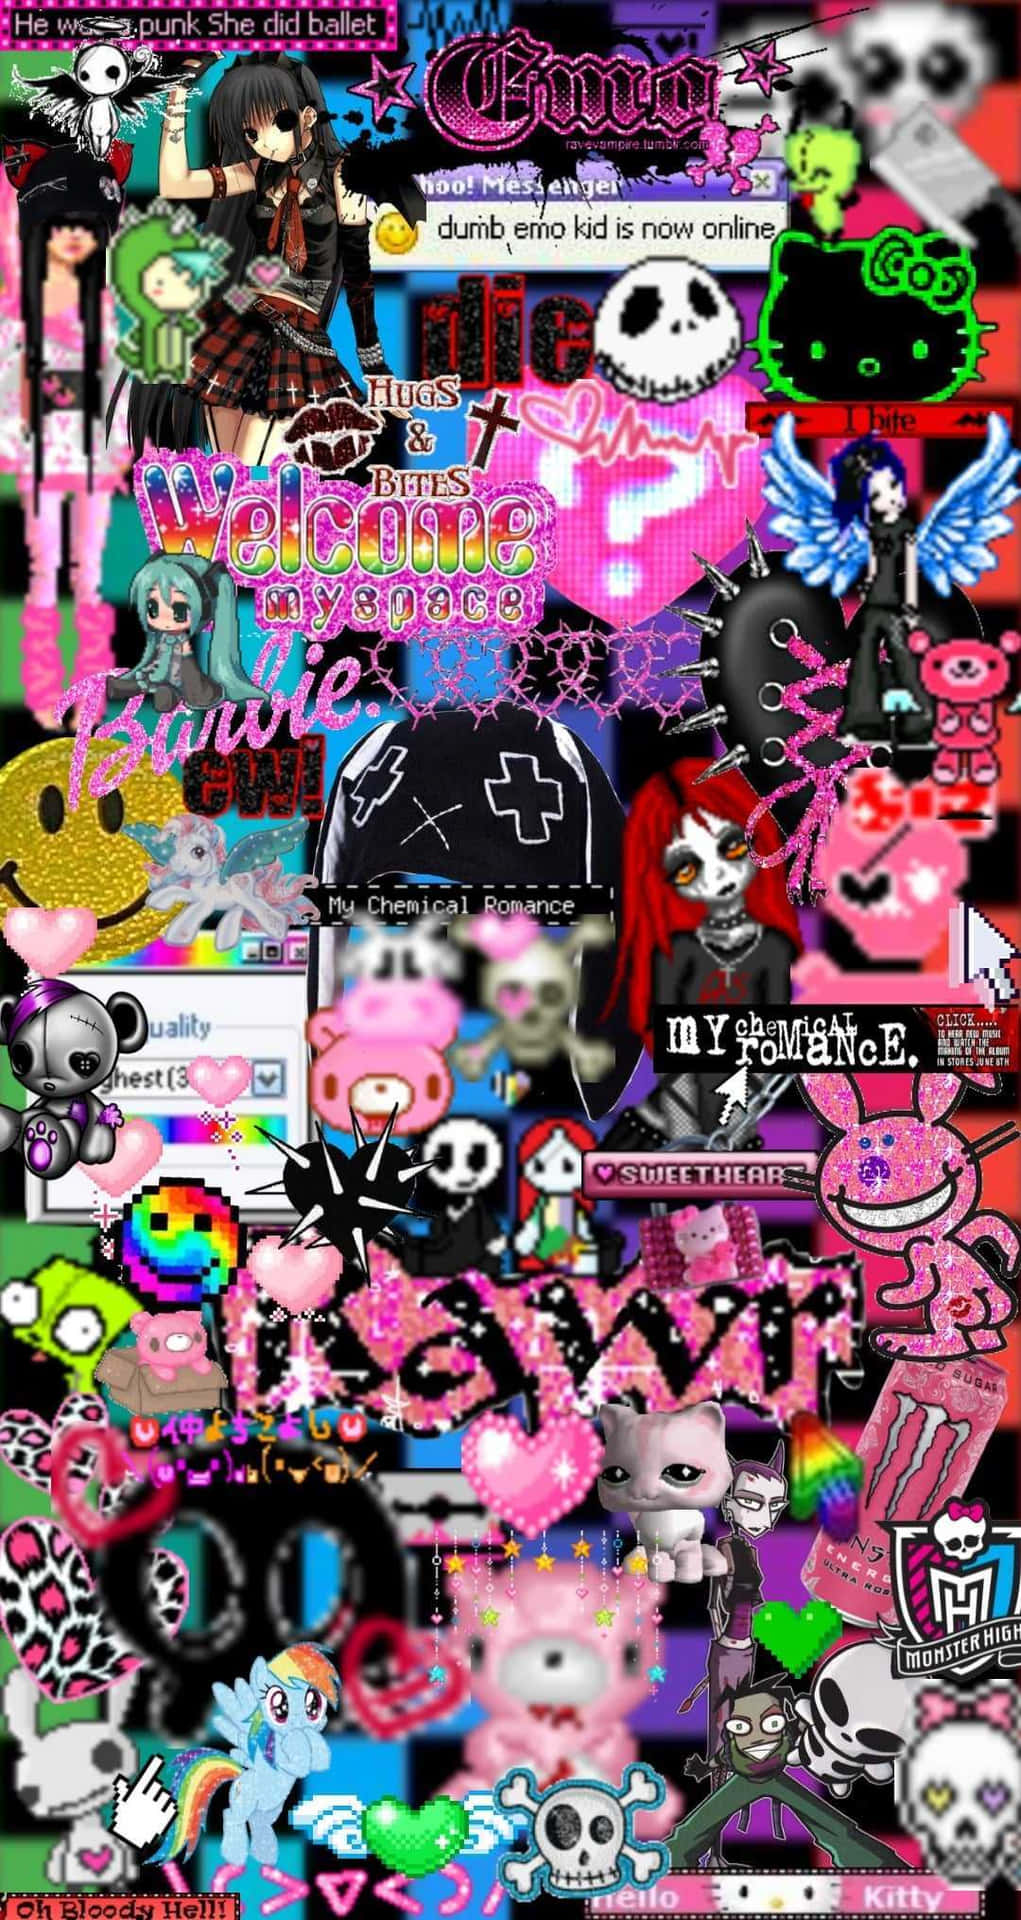 Download Weirdcore Pfp Of Edgy Style Wallpaper | Wallpapers.com